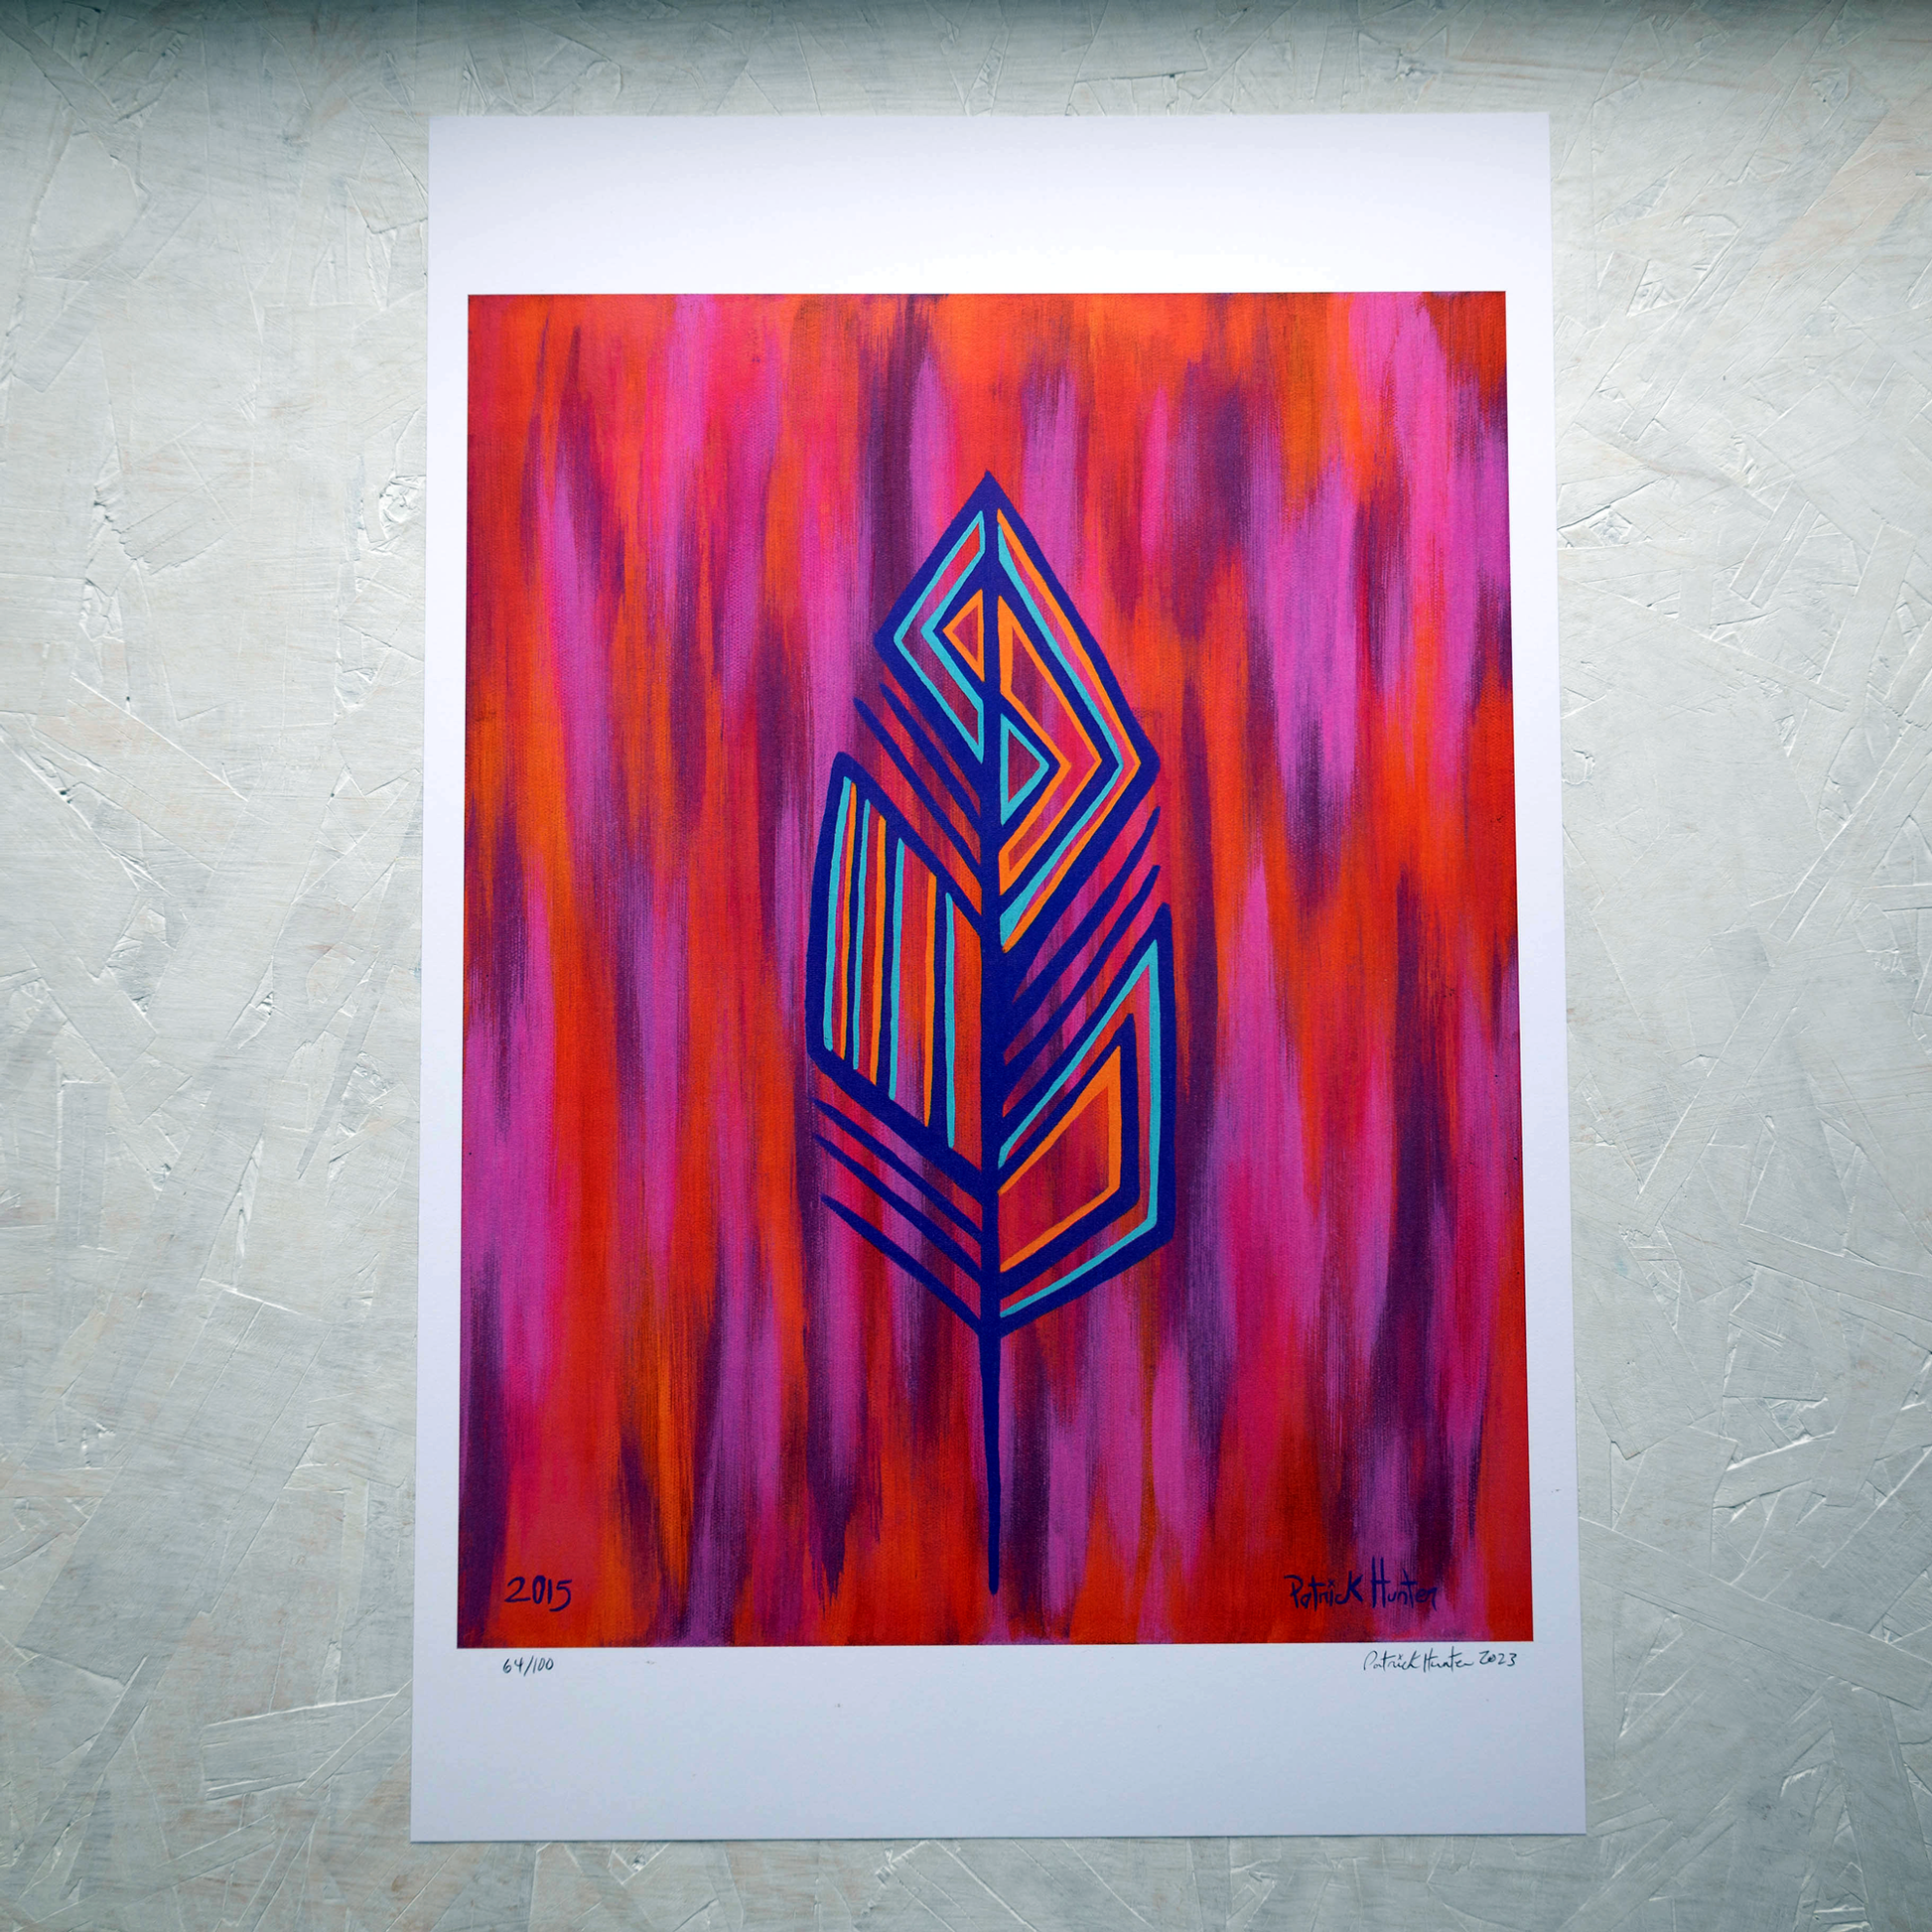 Print of Patrick Hunter's painting of a feather on a varigated pink, purple, orange background in woodland art style.